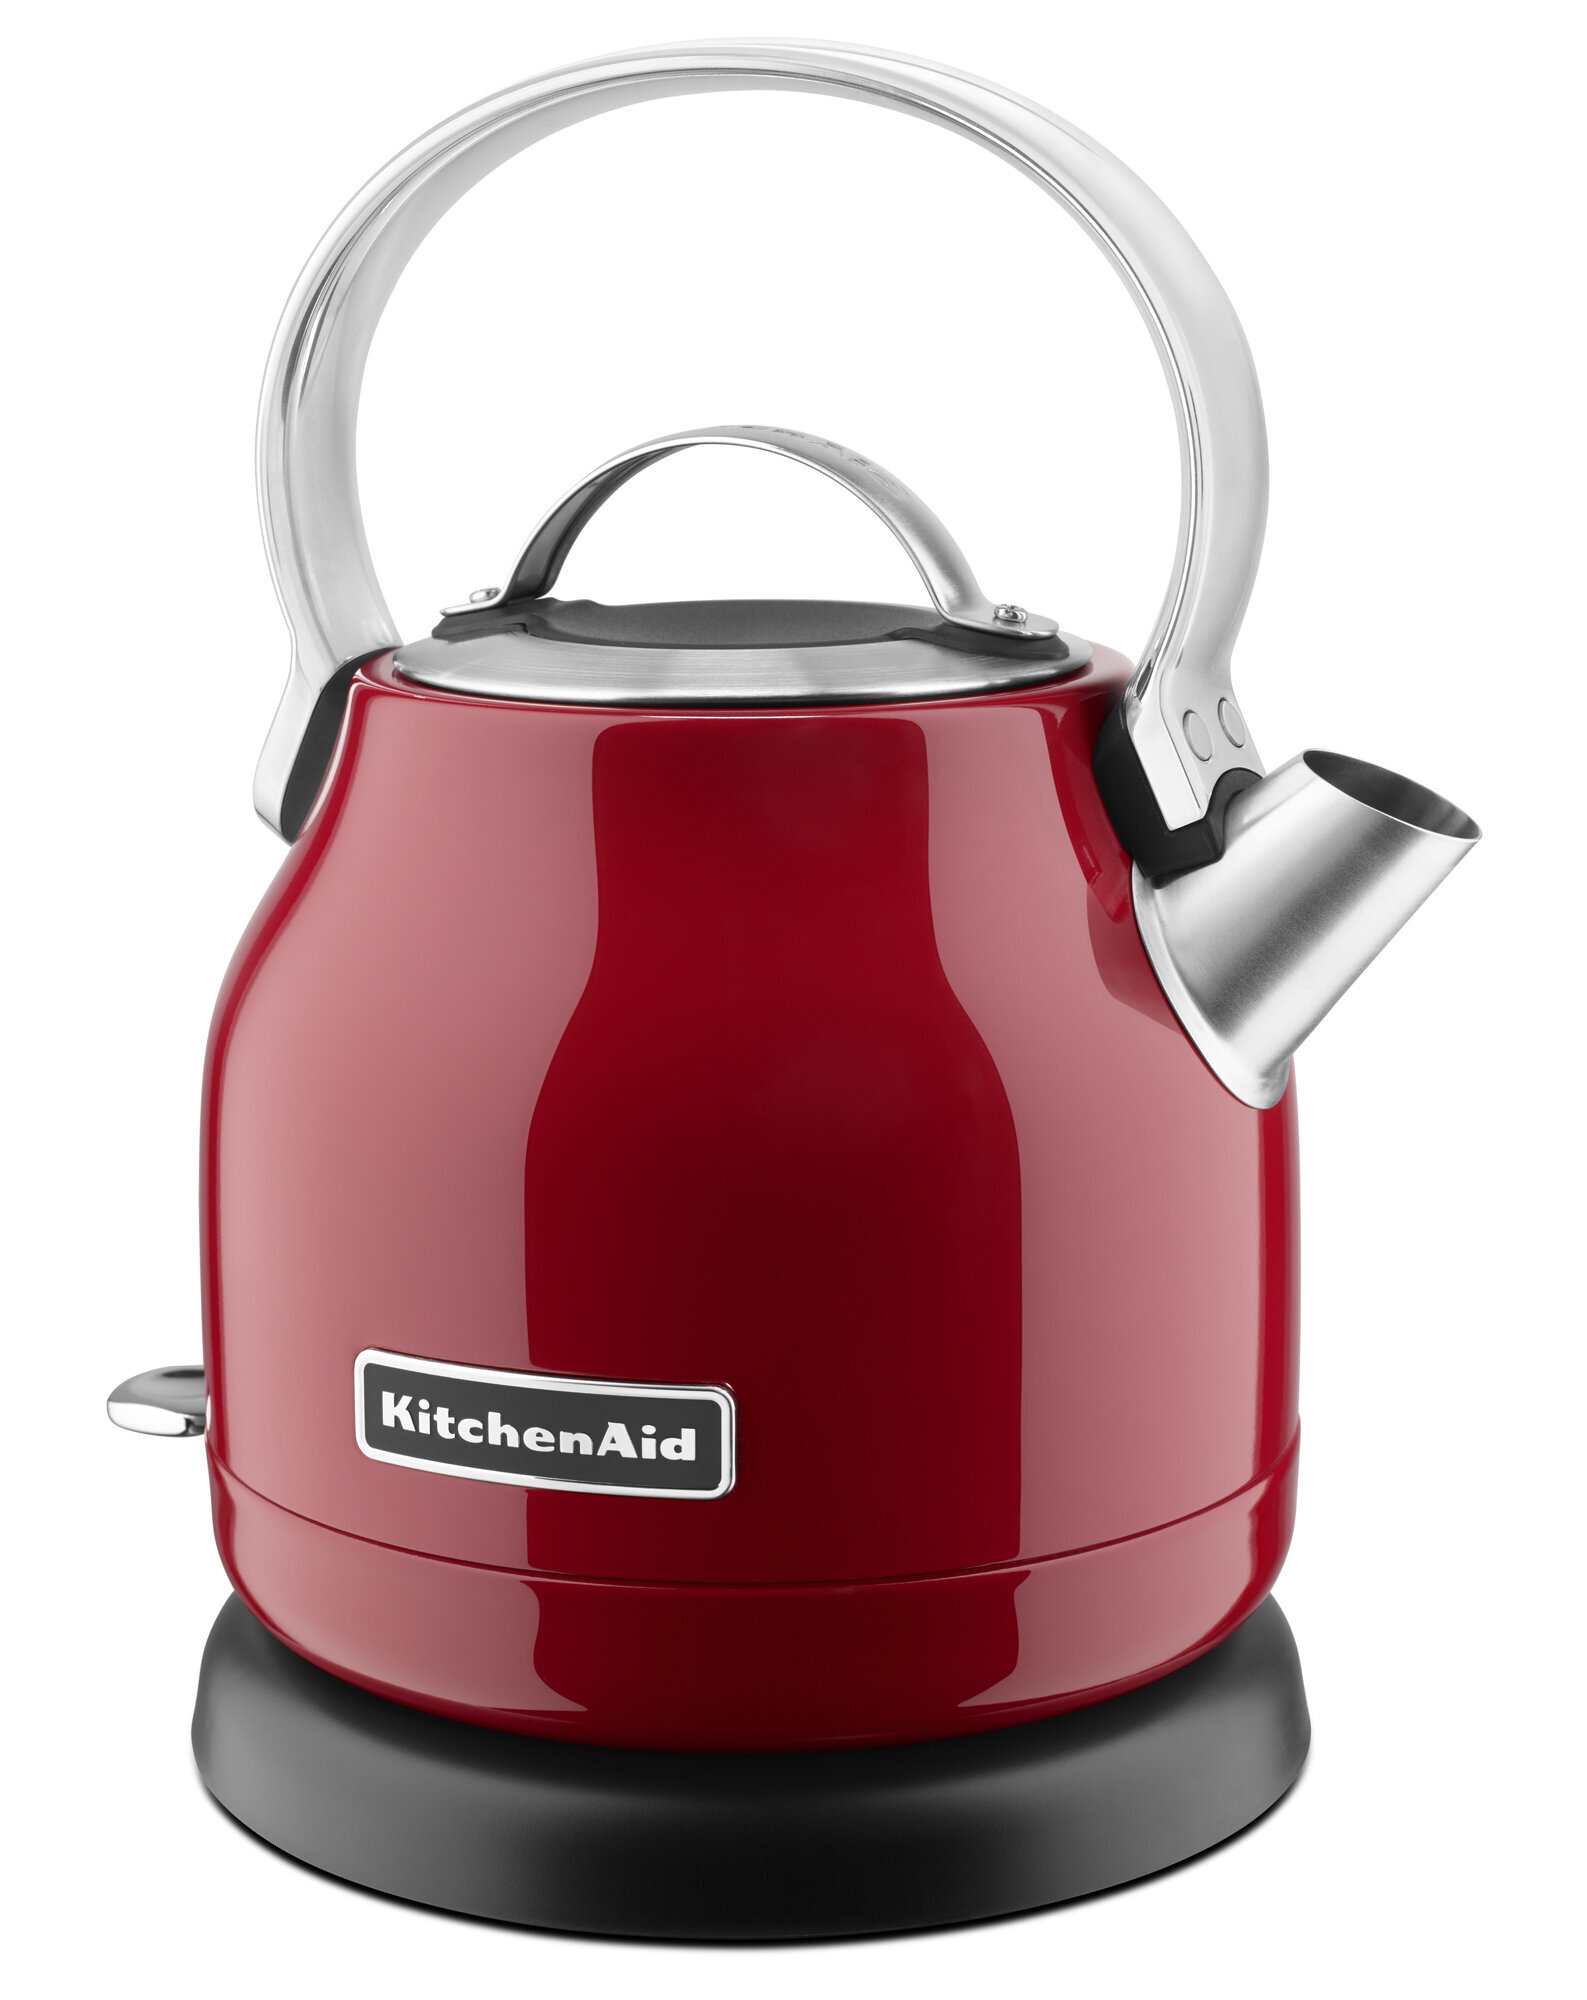 Kitchenaid Electric Kettle Empire Red